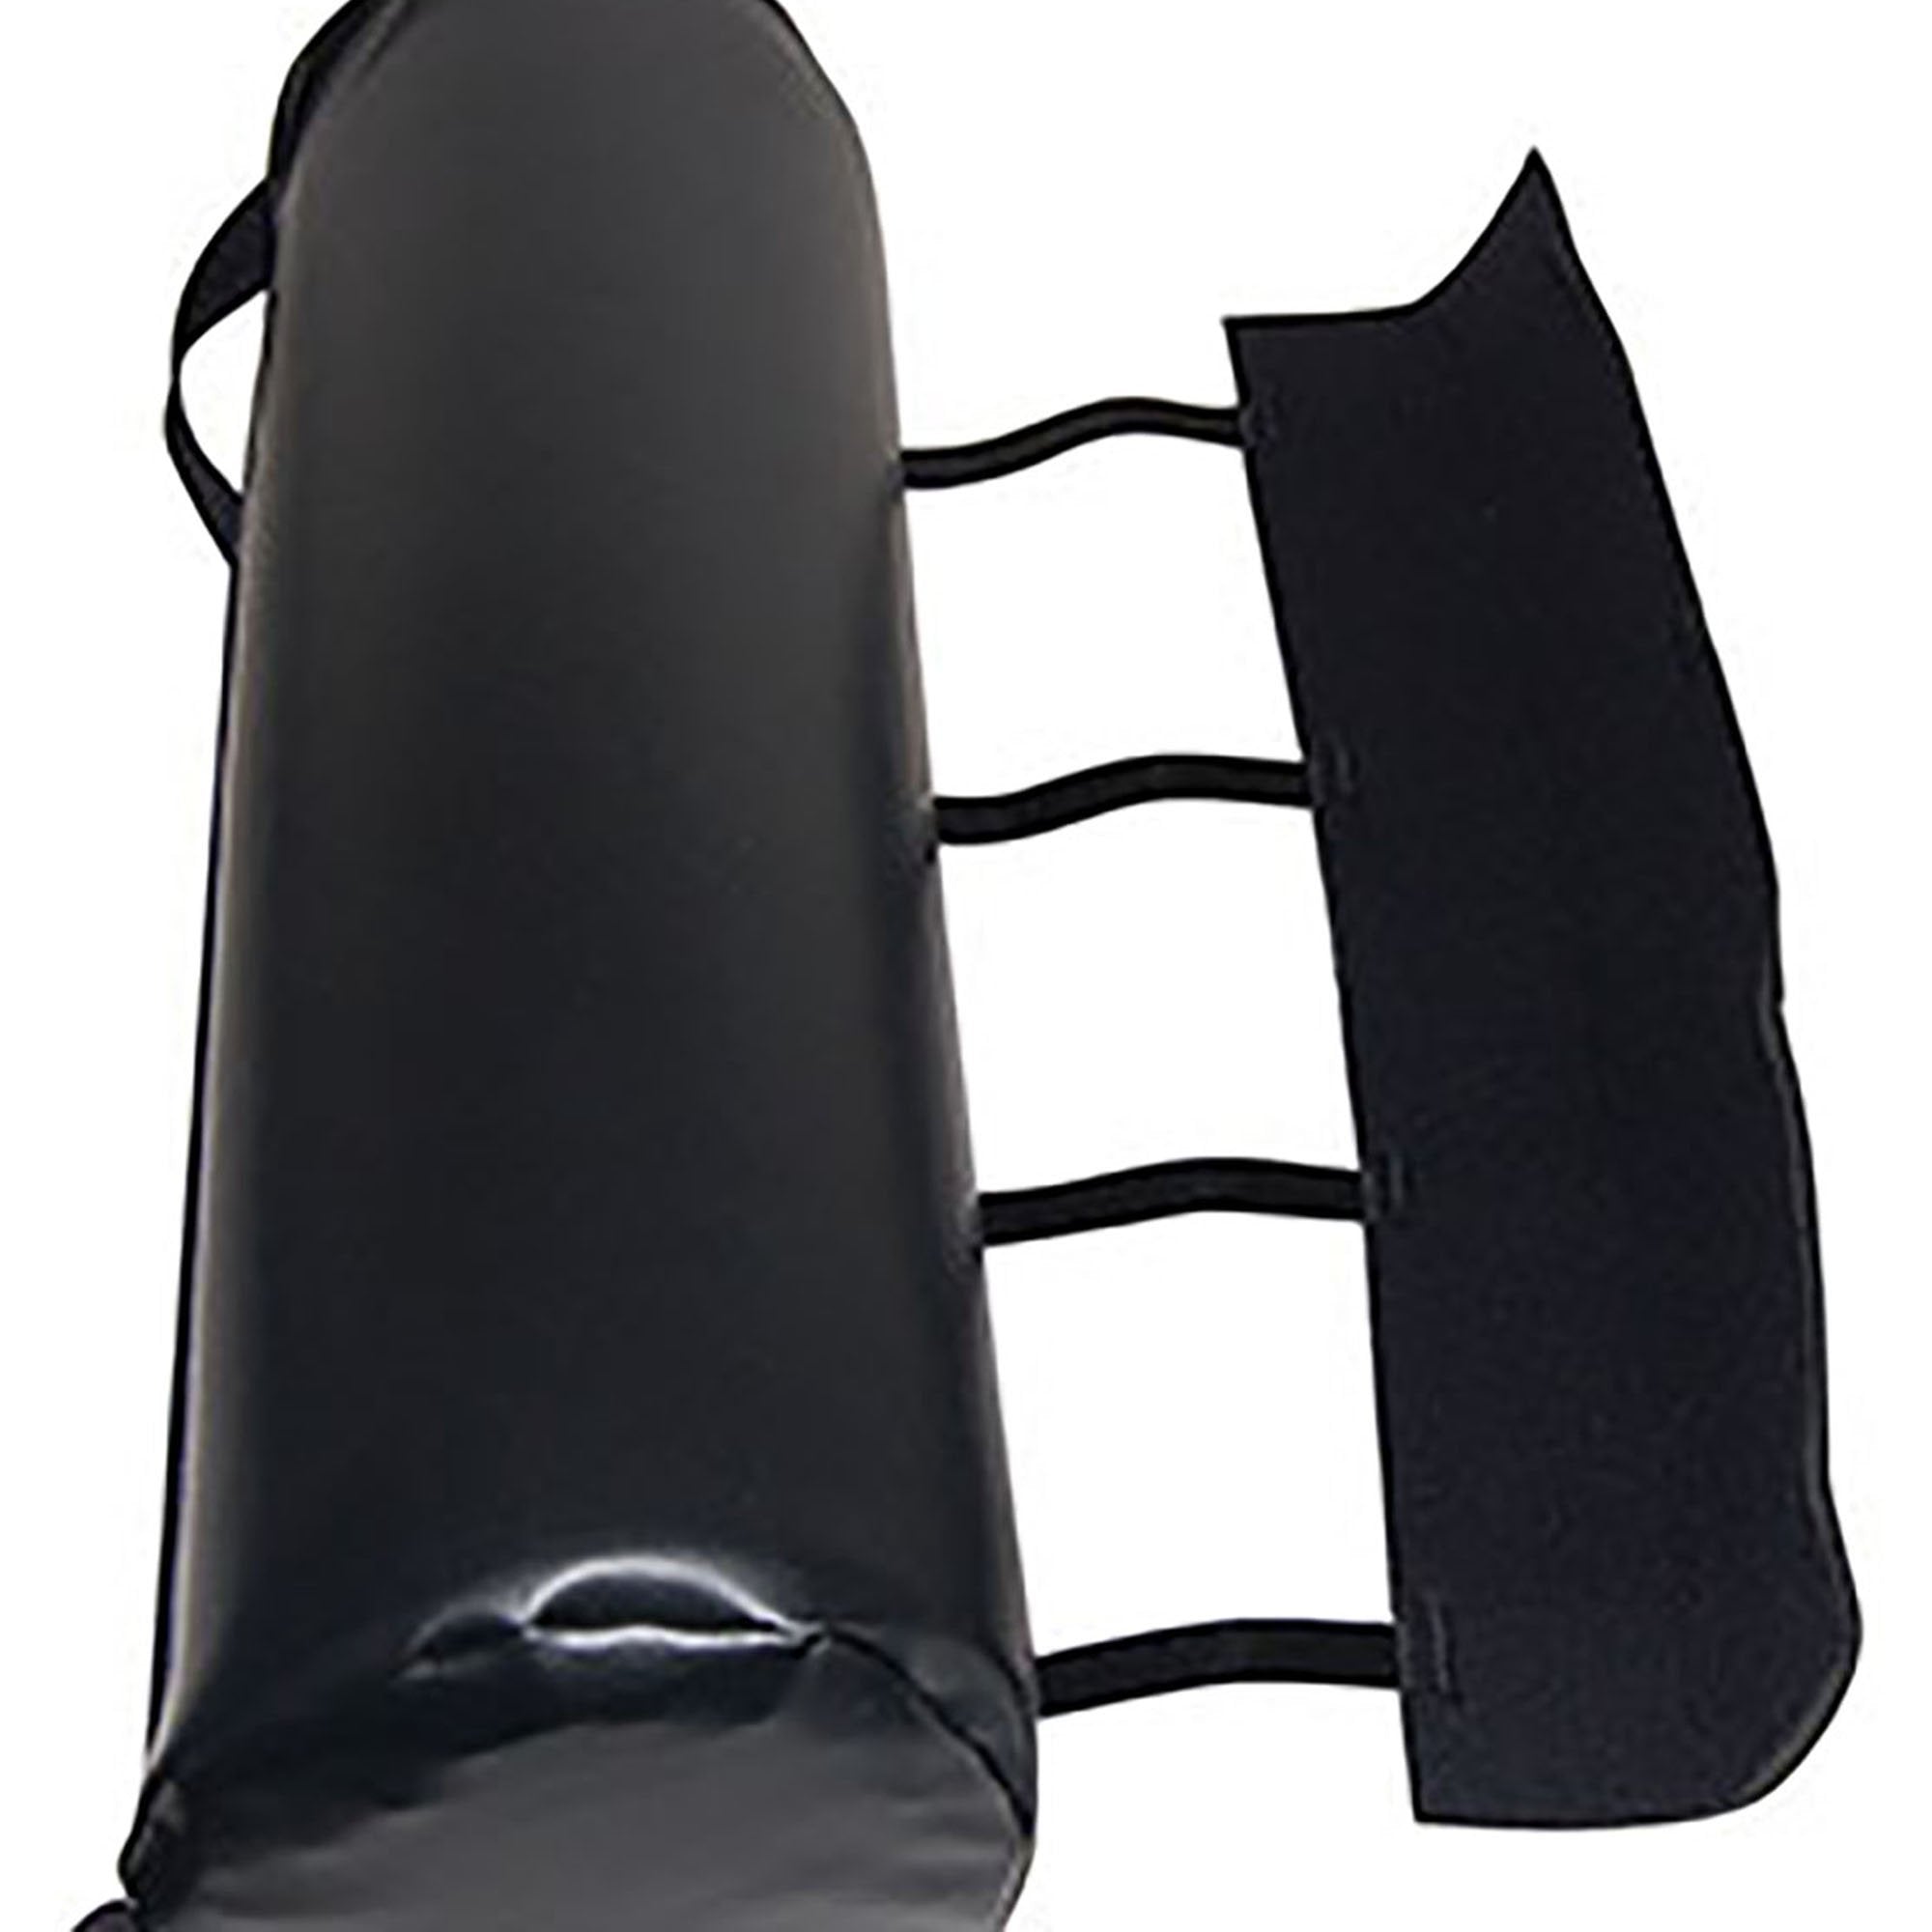 Leg Protectors SkiL-Care™ For Wheelchair